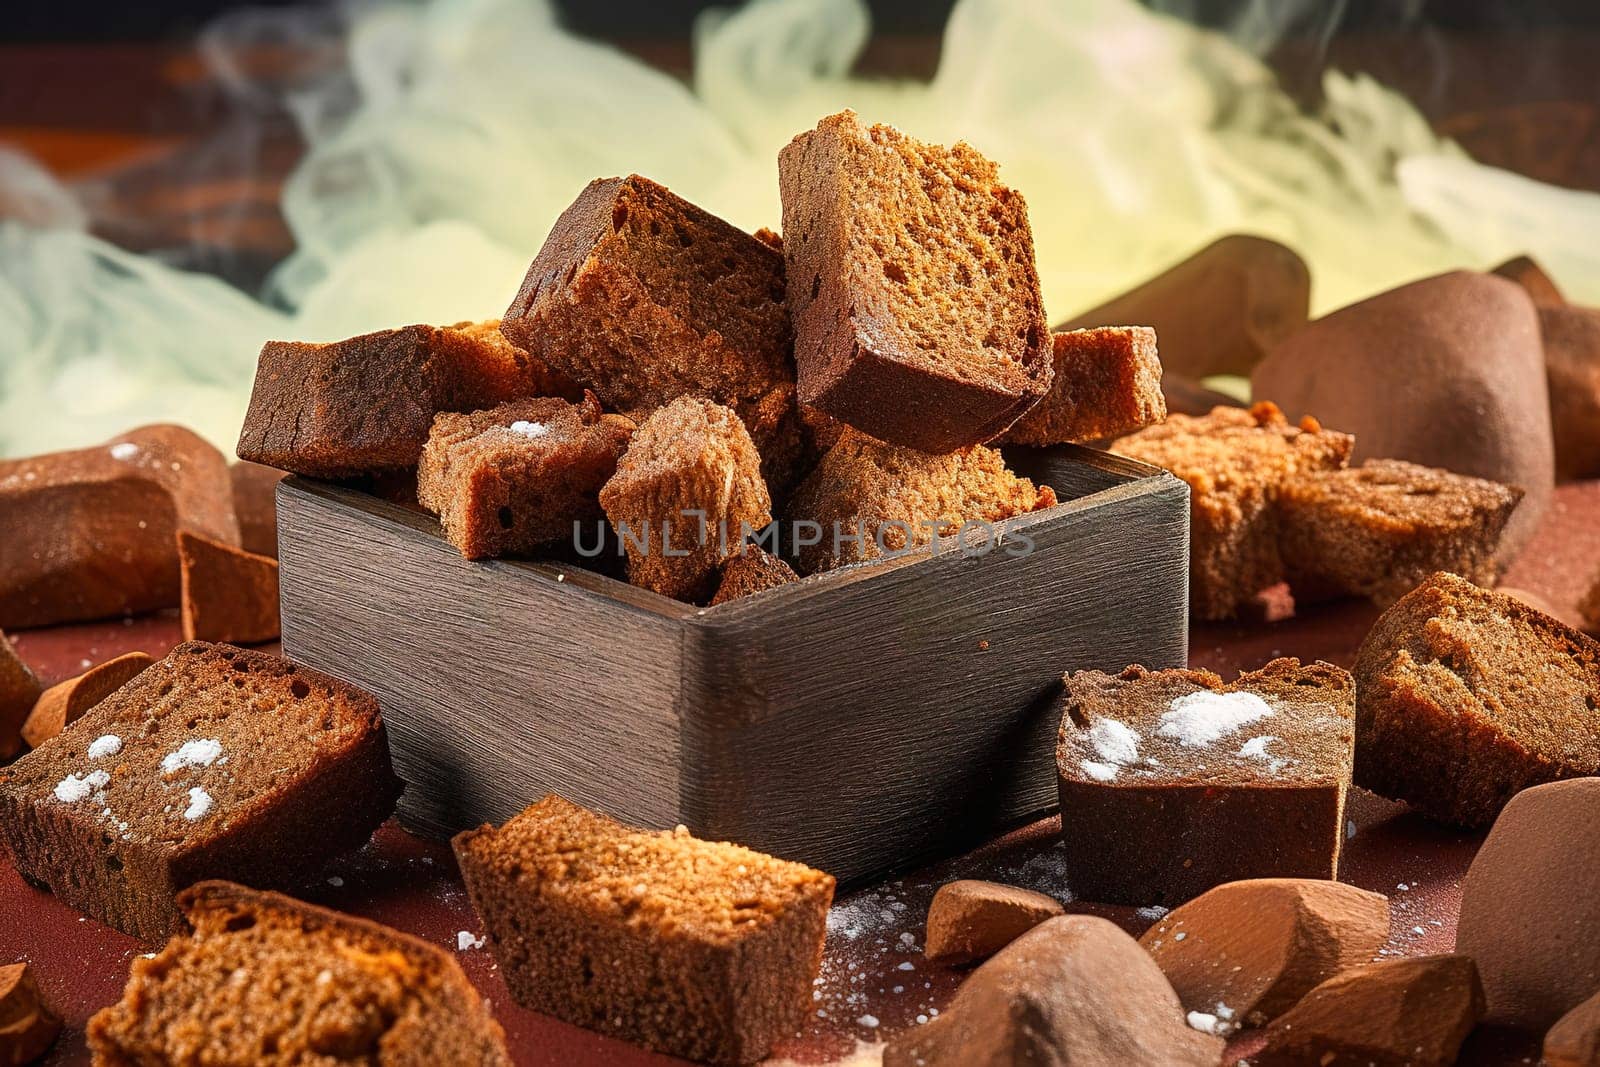 Borodino croutons, crackers, fried slices of black bread in oil. High quality photo